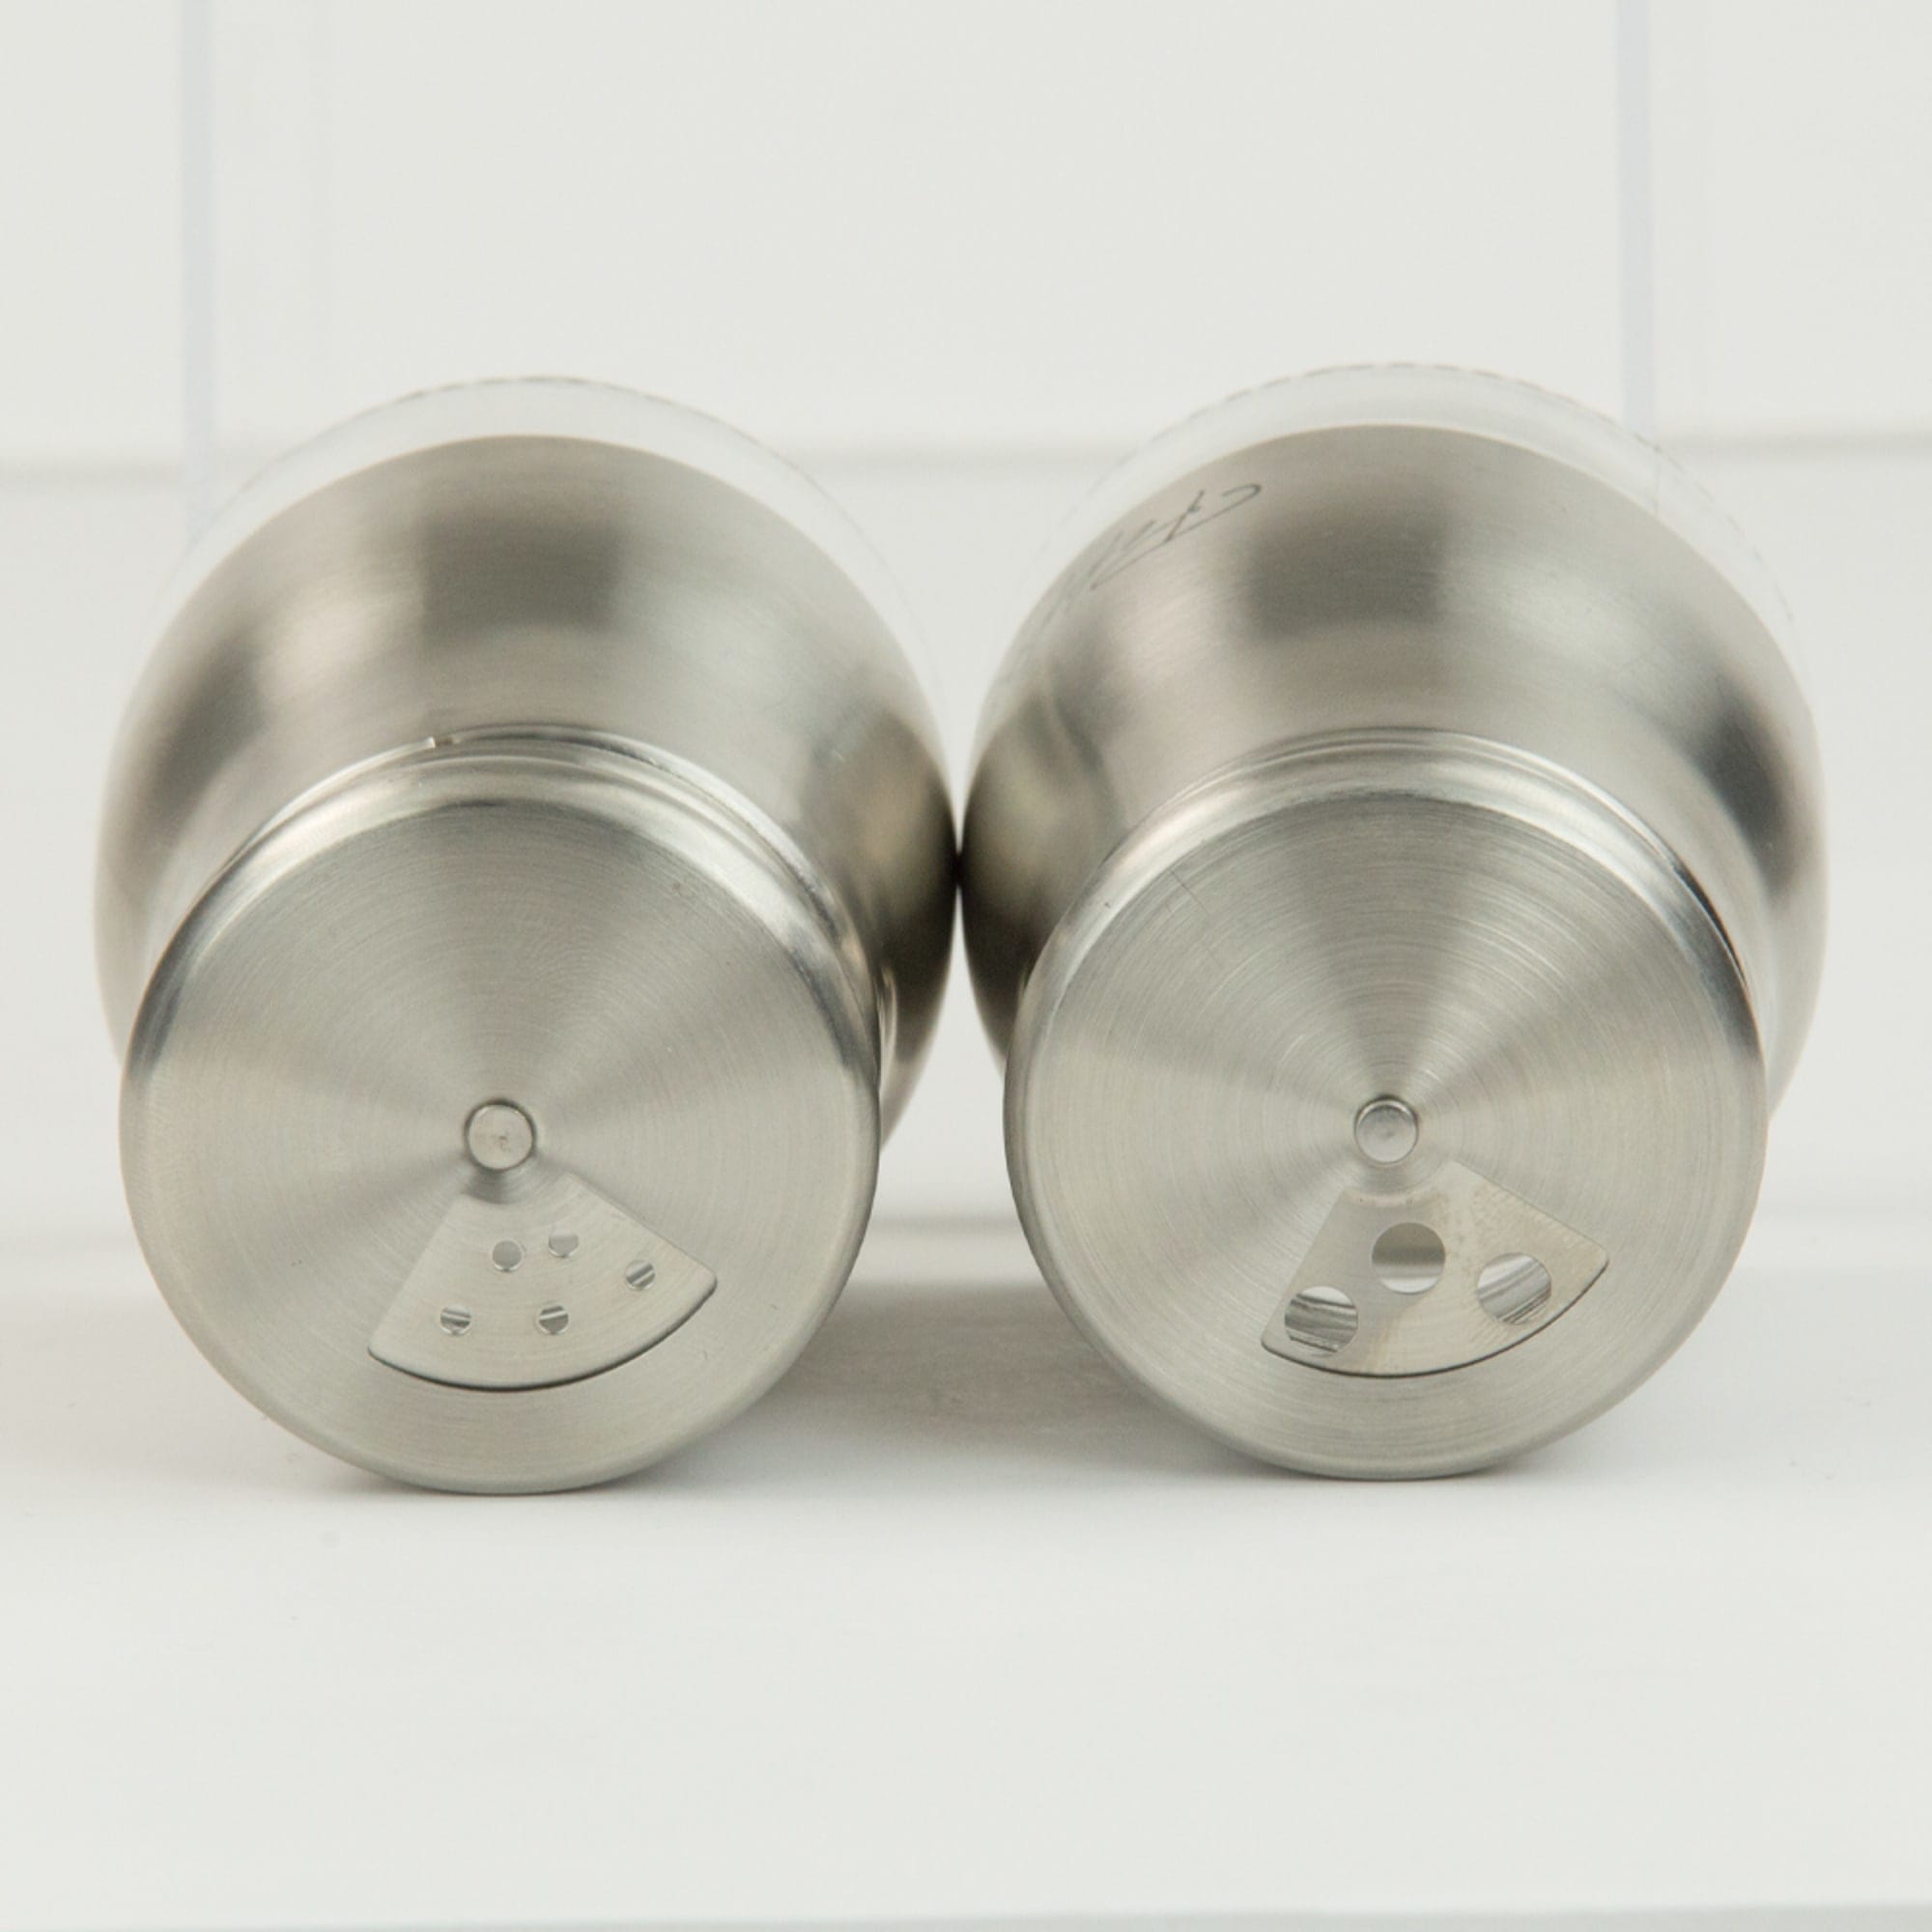 Home Basics 5 oz. Salt and Pepper Set with See-Through Glass Base, Silver $4.00 EACH, CASE PACK OF 12